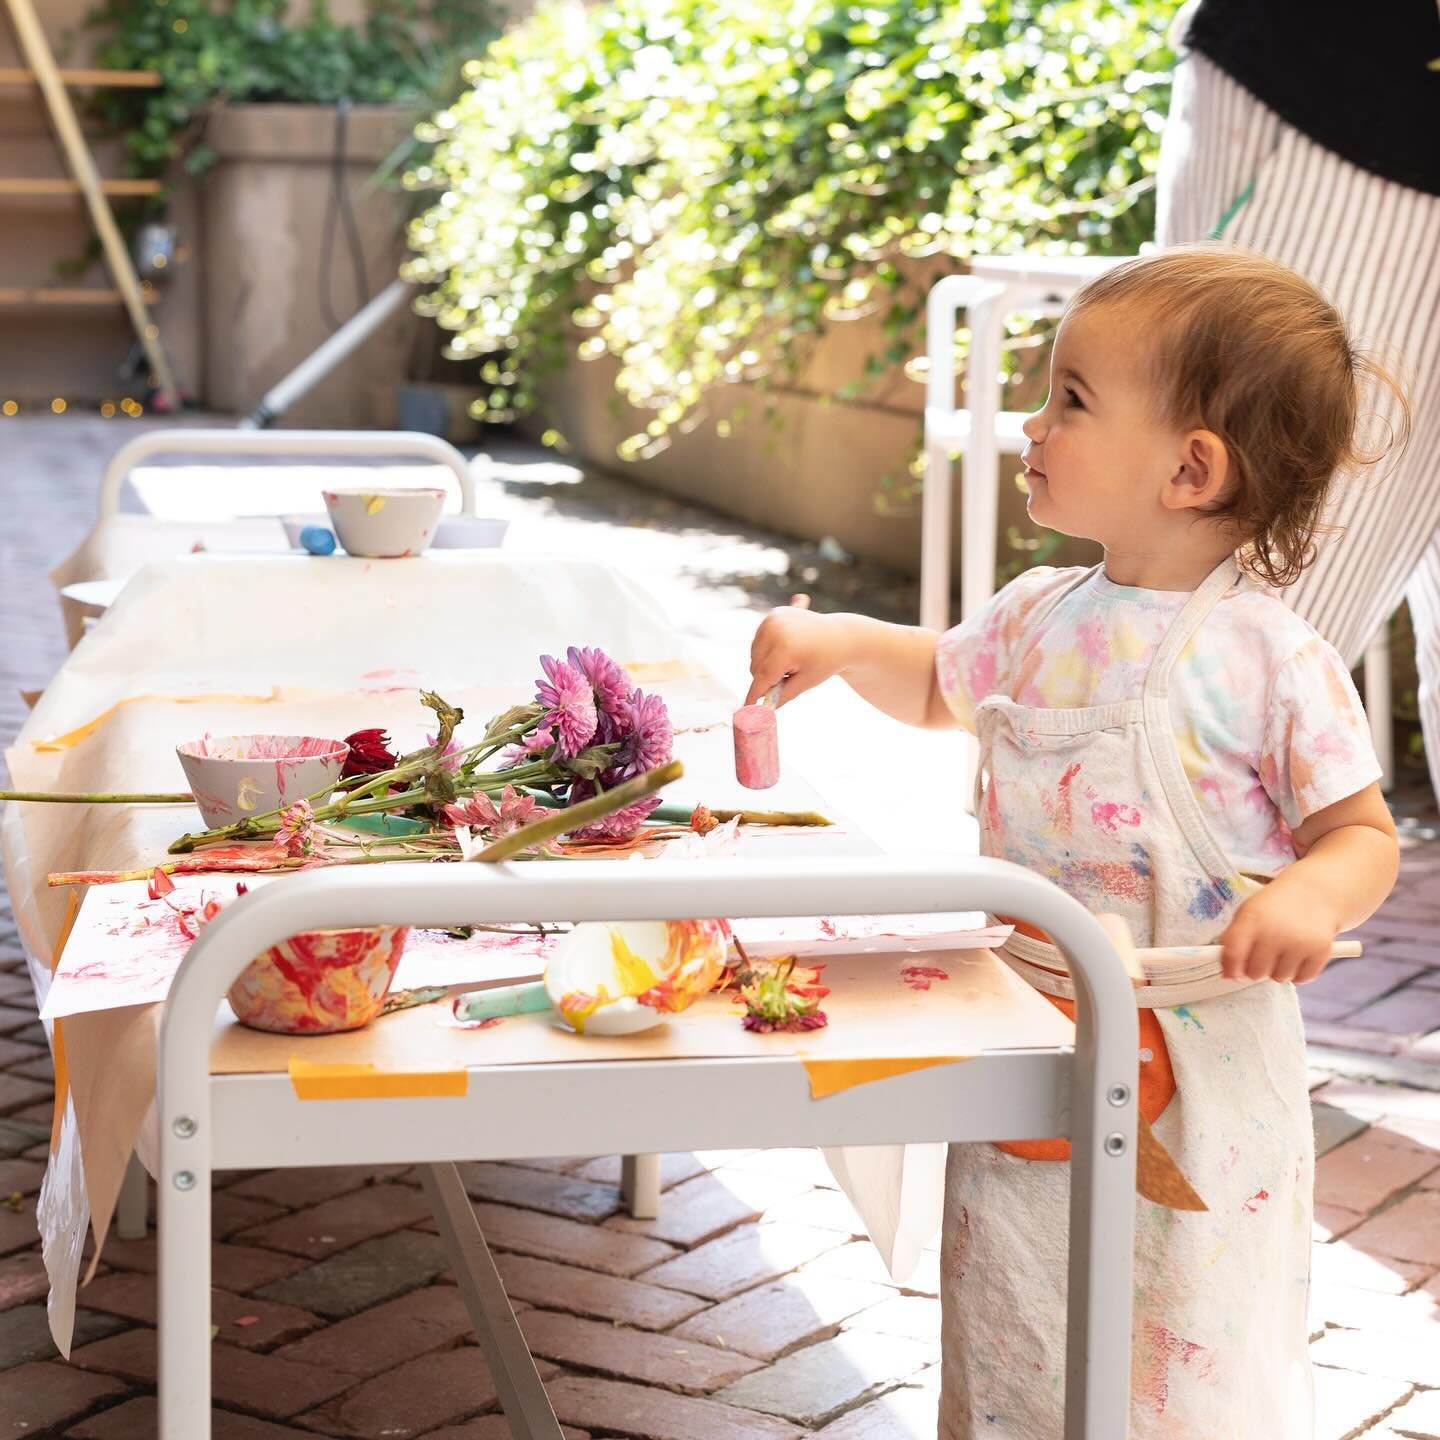 We have more summer toddler classes at Minni than ever! ✨ Join us this summer in the South End for Minni Outdoor Explorers or our popular Minni Art Book Club in Beacon Hill! 

Start your summer days off in the sunshine of our South End patio every Tu